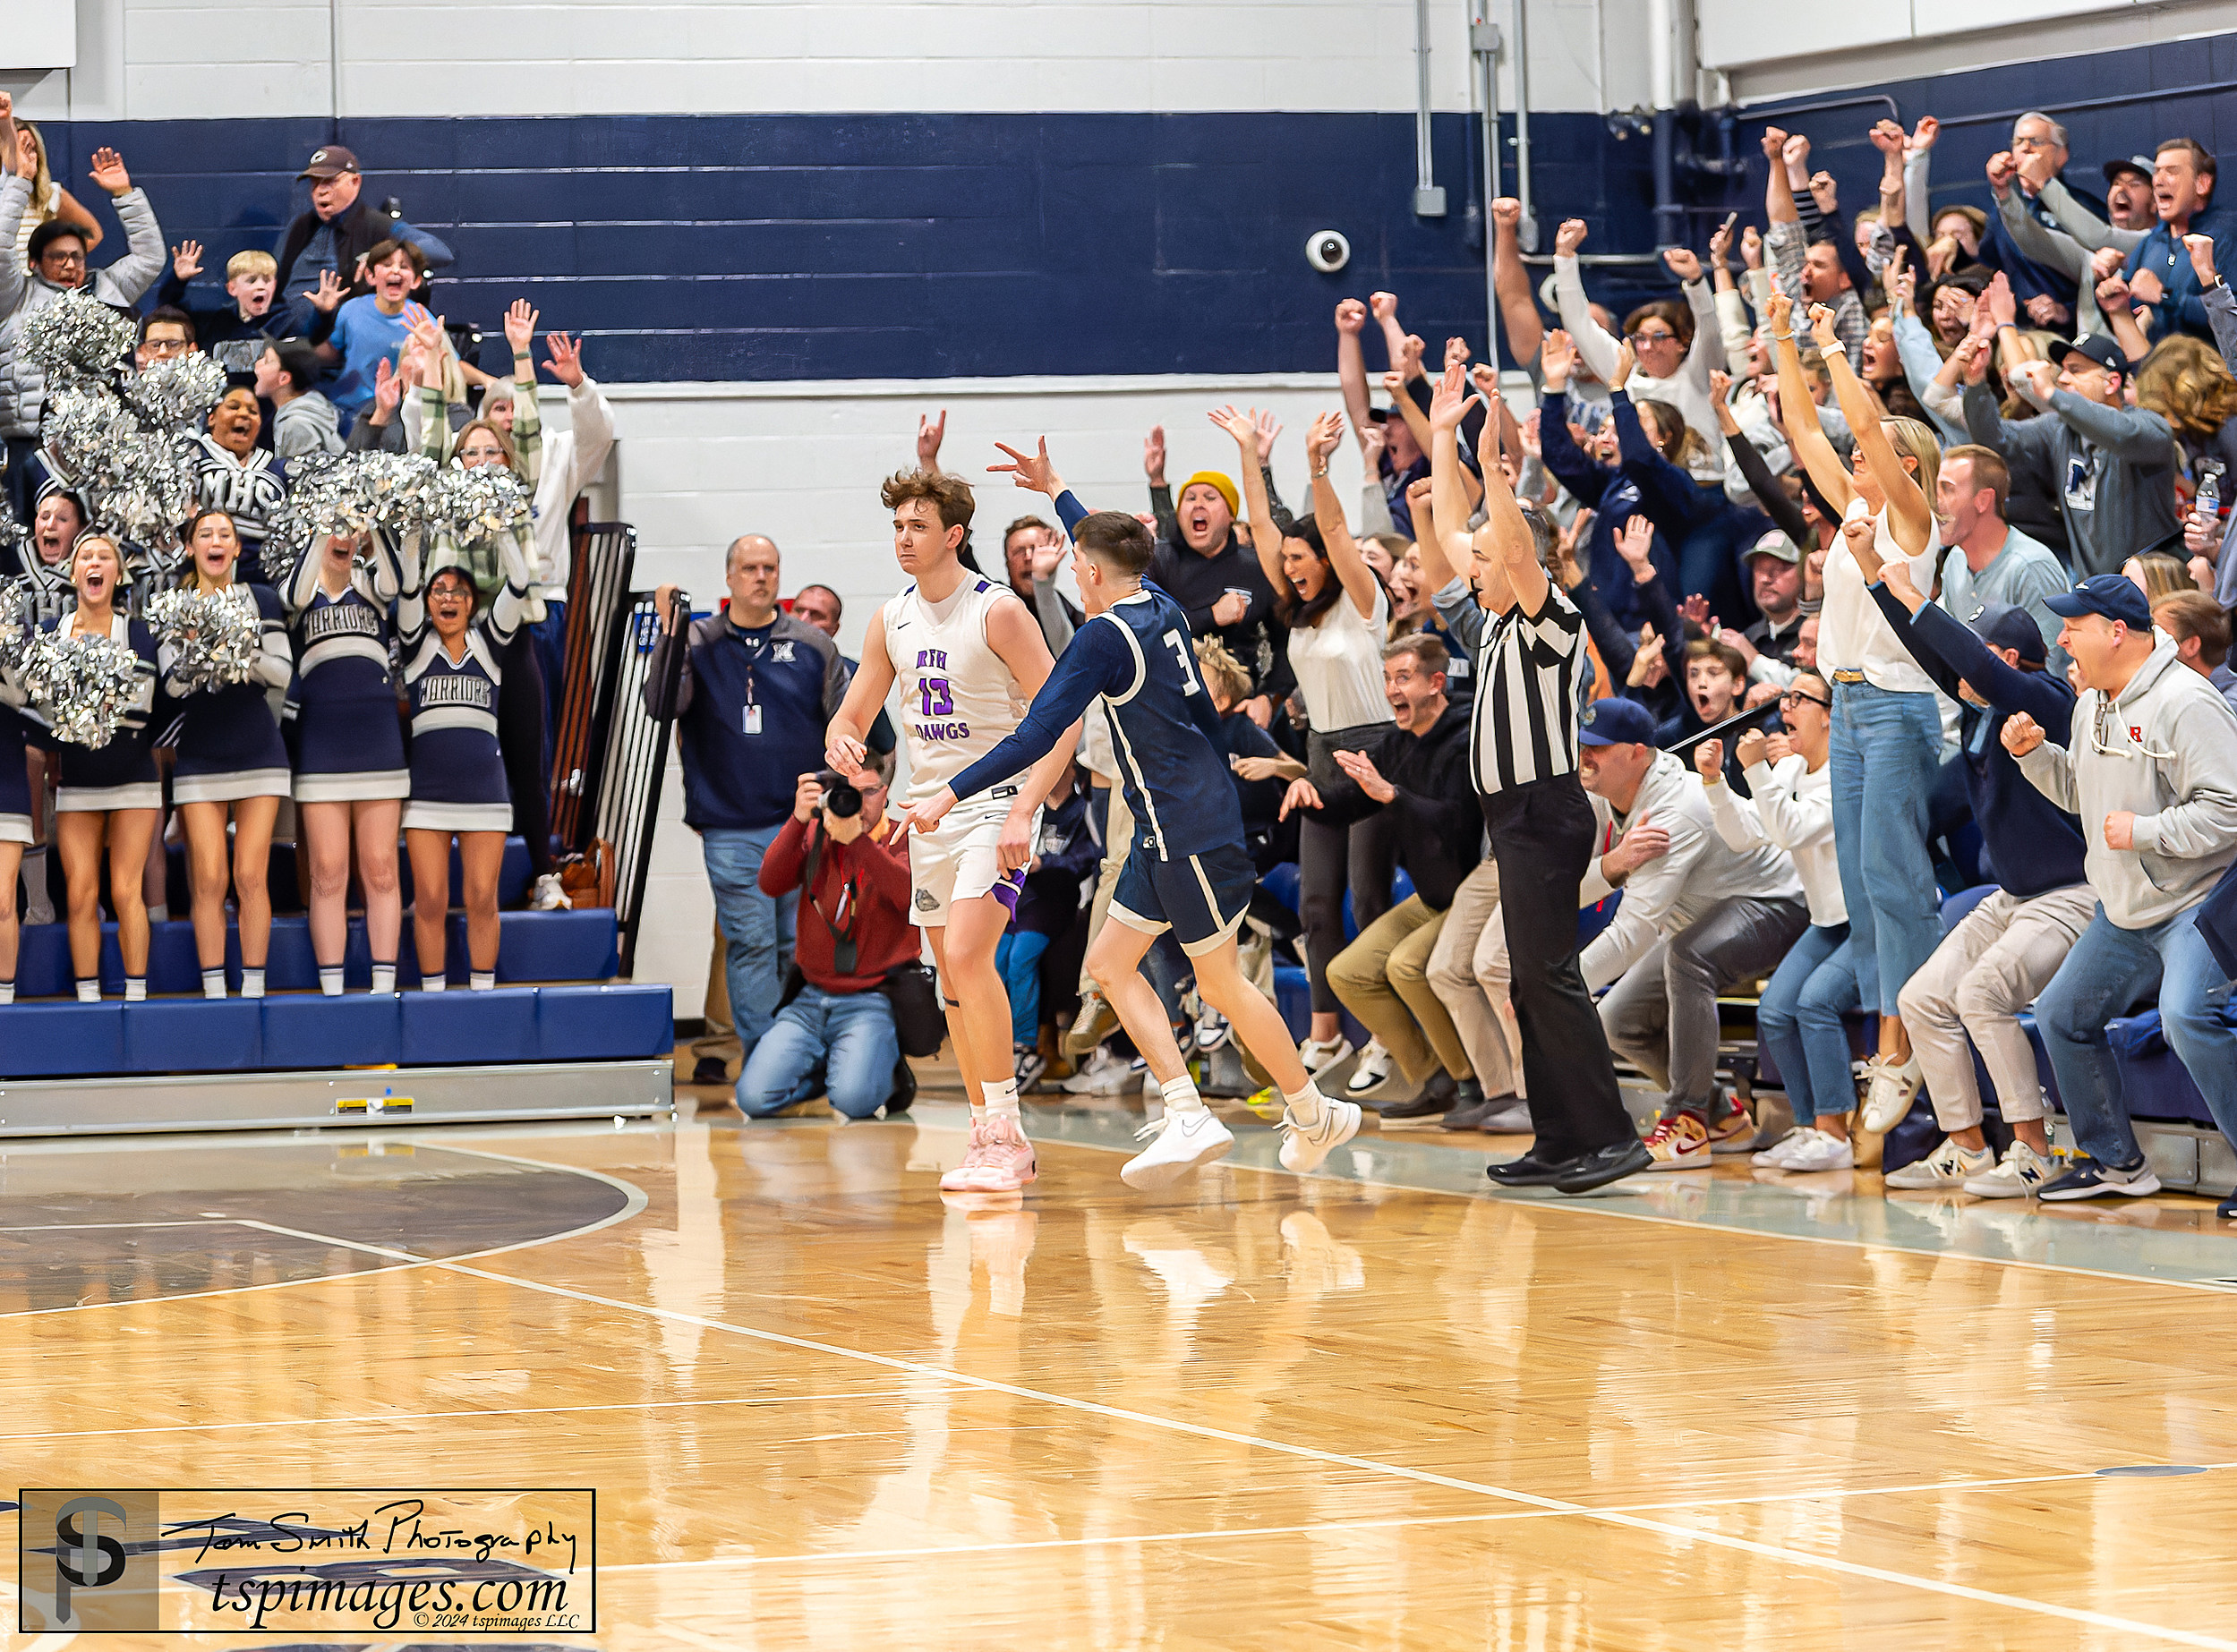 Manasquan senior Jason Larned (3) reacts to hitting the go-ahead three-pointer in the last minute of the NJSIAA Central Jersey Group II championship game vs. Rumson-Fair Haven. (Photo: Tom Smith | tspsportsimages.com)